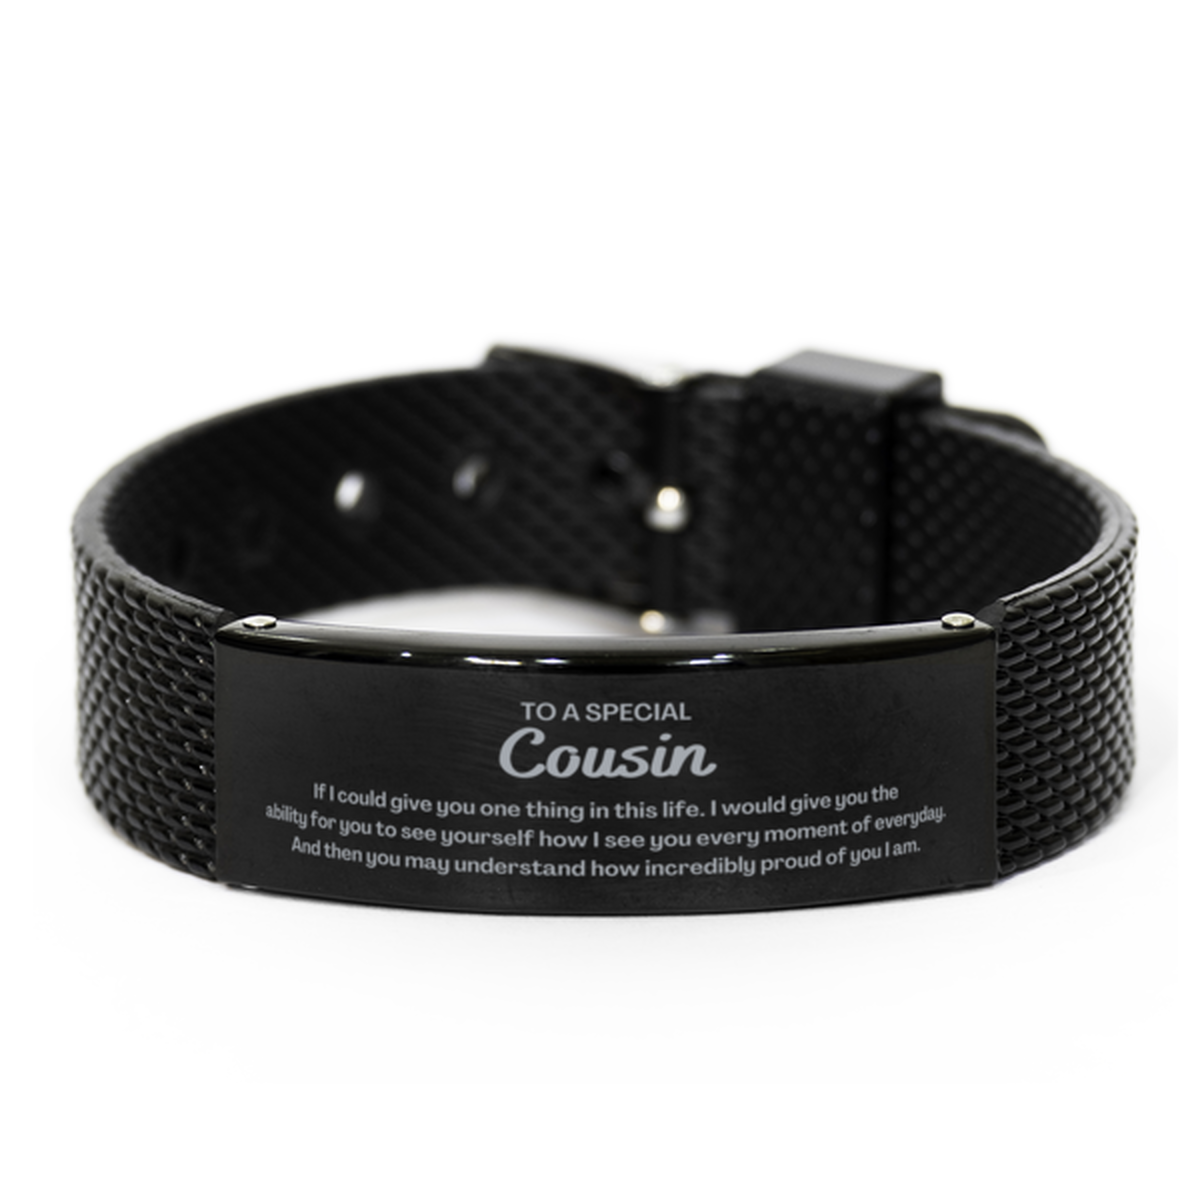 To My Cousin Black Shark Mesh Bracelet, Gifts For Cousin Engraved, Inspirational Gifts for Christmas Birthday, Epic Gifts for Cousin To A Special Cousin how incredibly proud of you I am